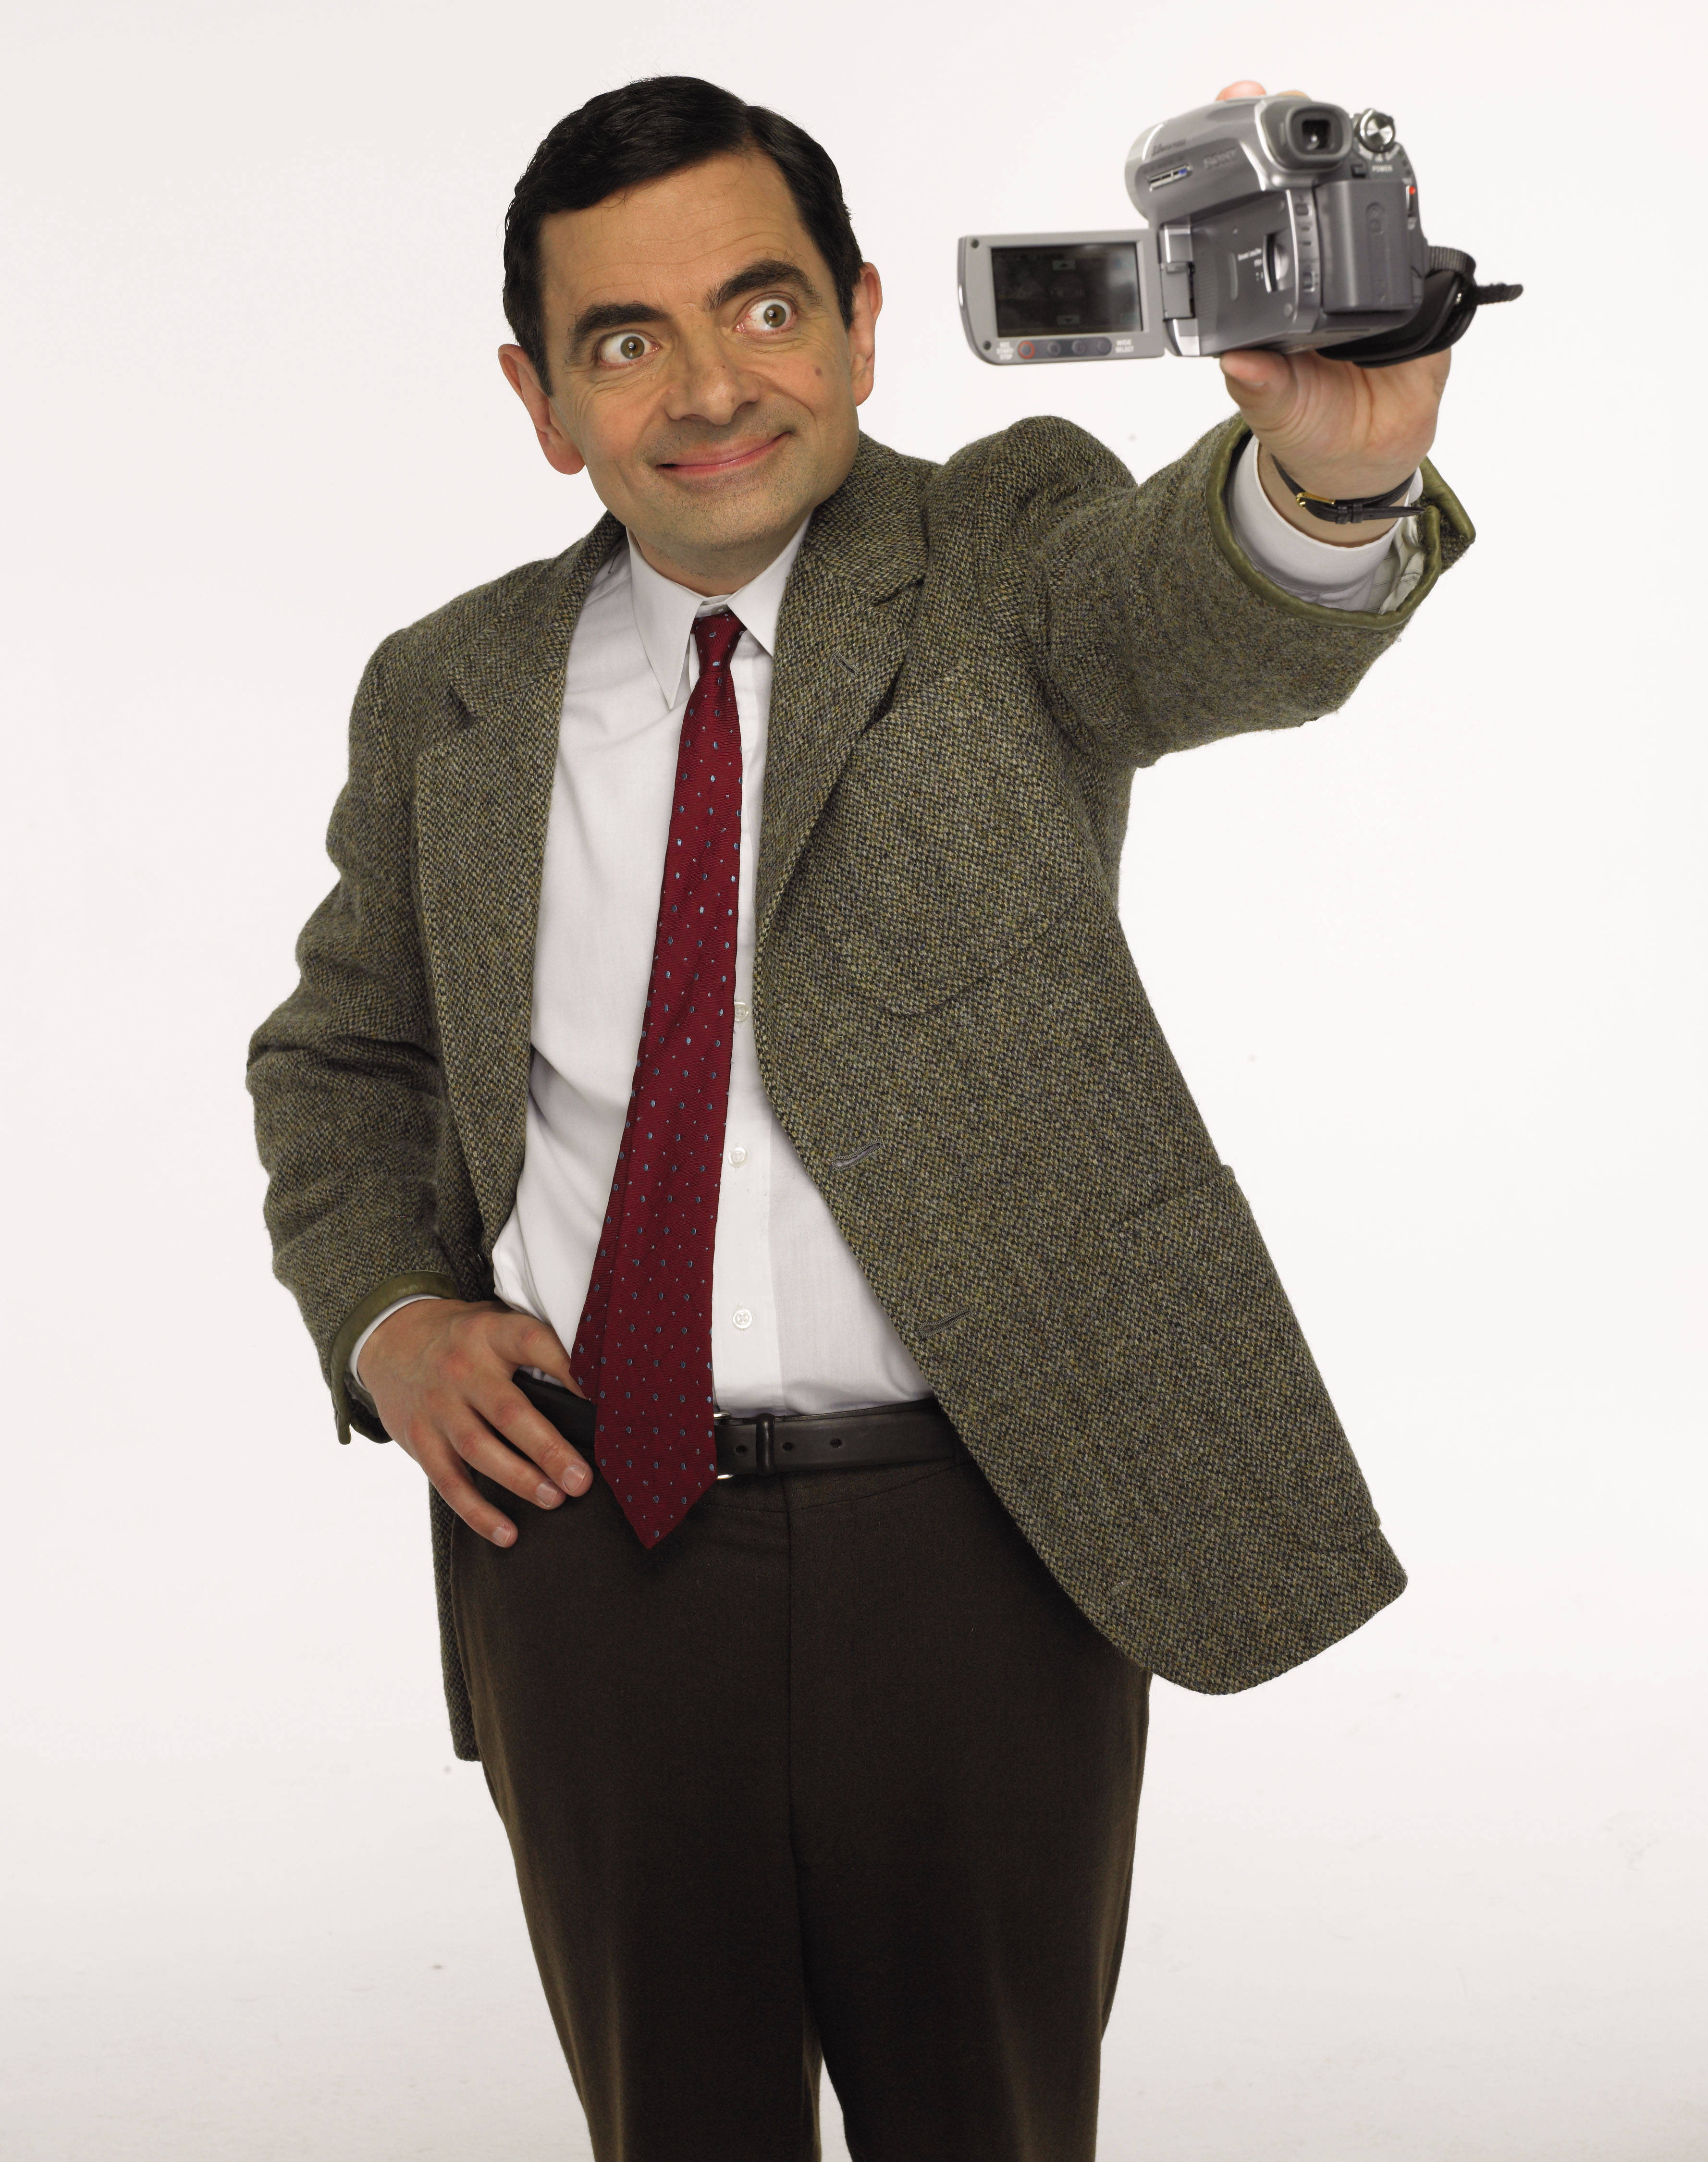 High Definition Image Of Mr. Bean With 4k Video Camera Wallpaper